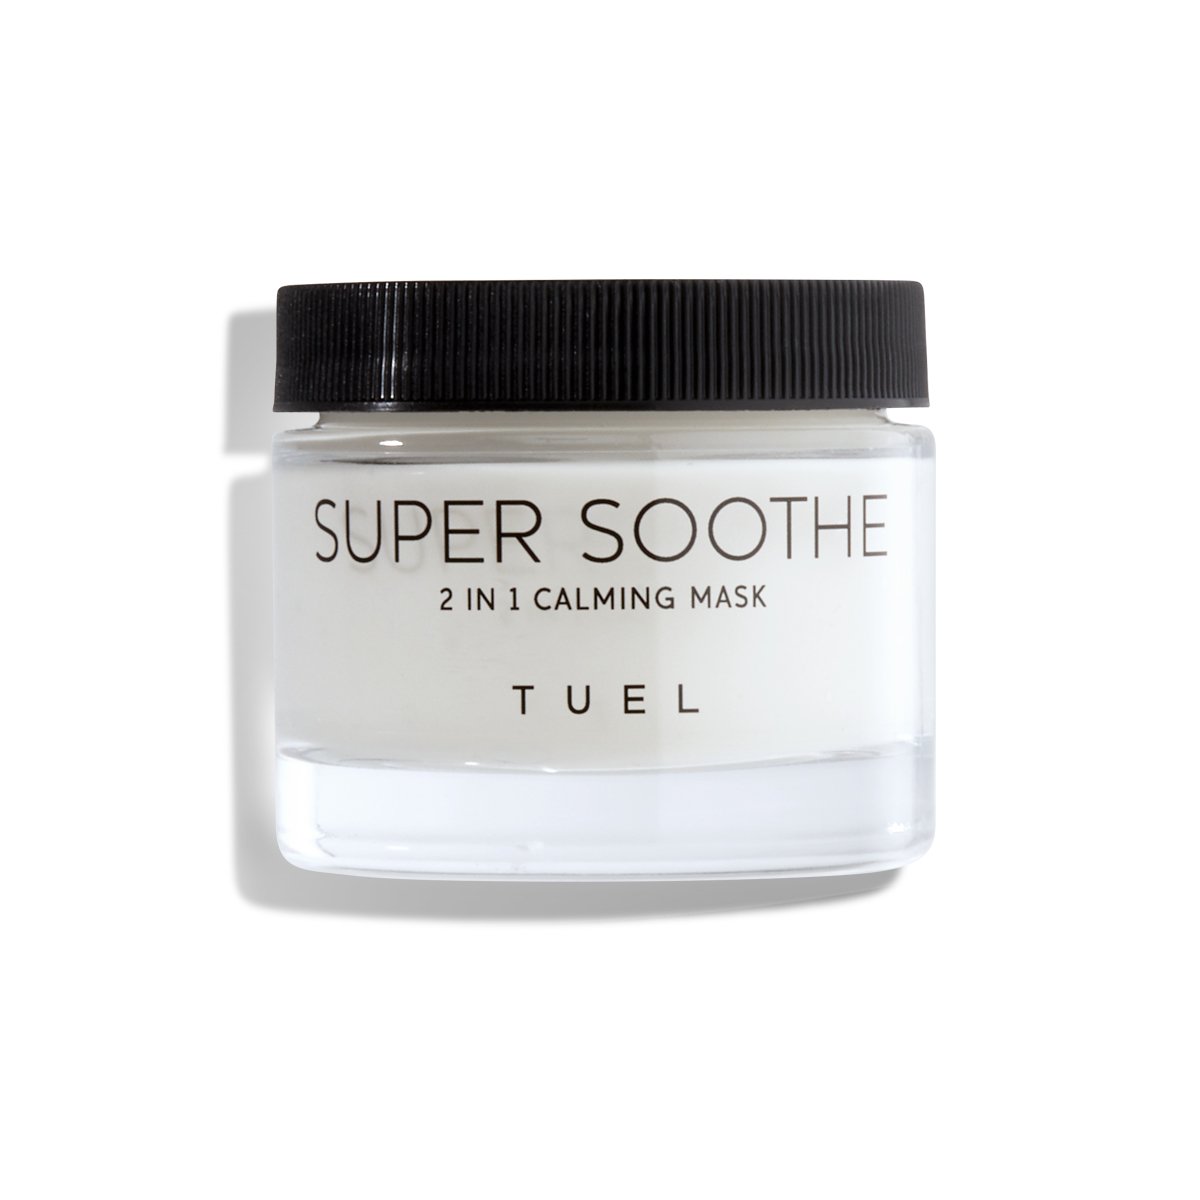 TUEL SUPER SOOTHE 2 IN 1 CALMING MASK, 2oz/60ml